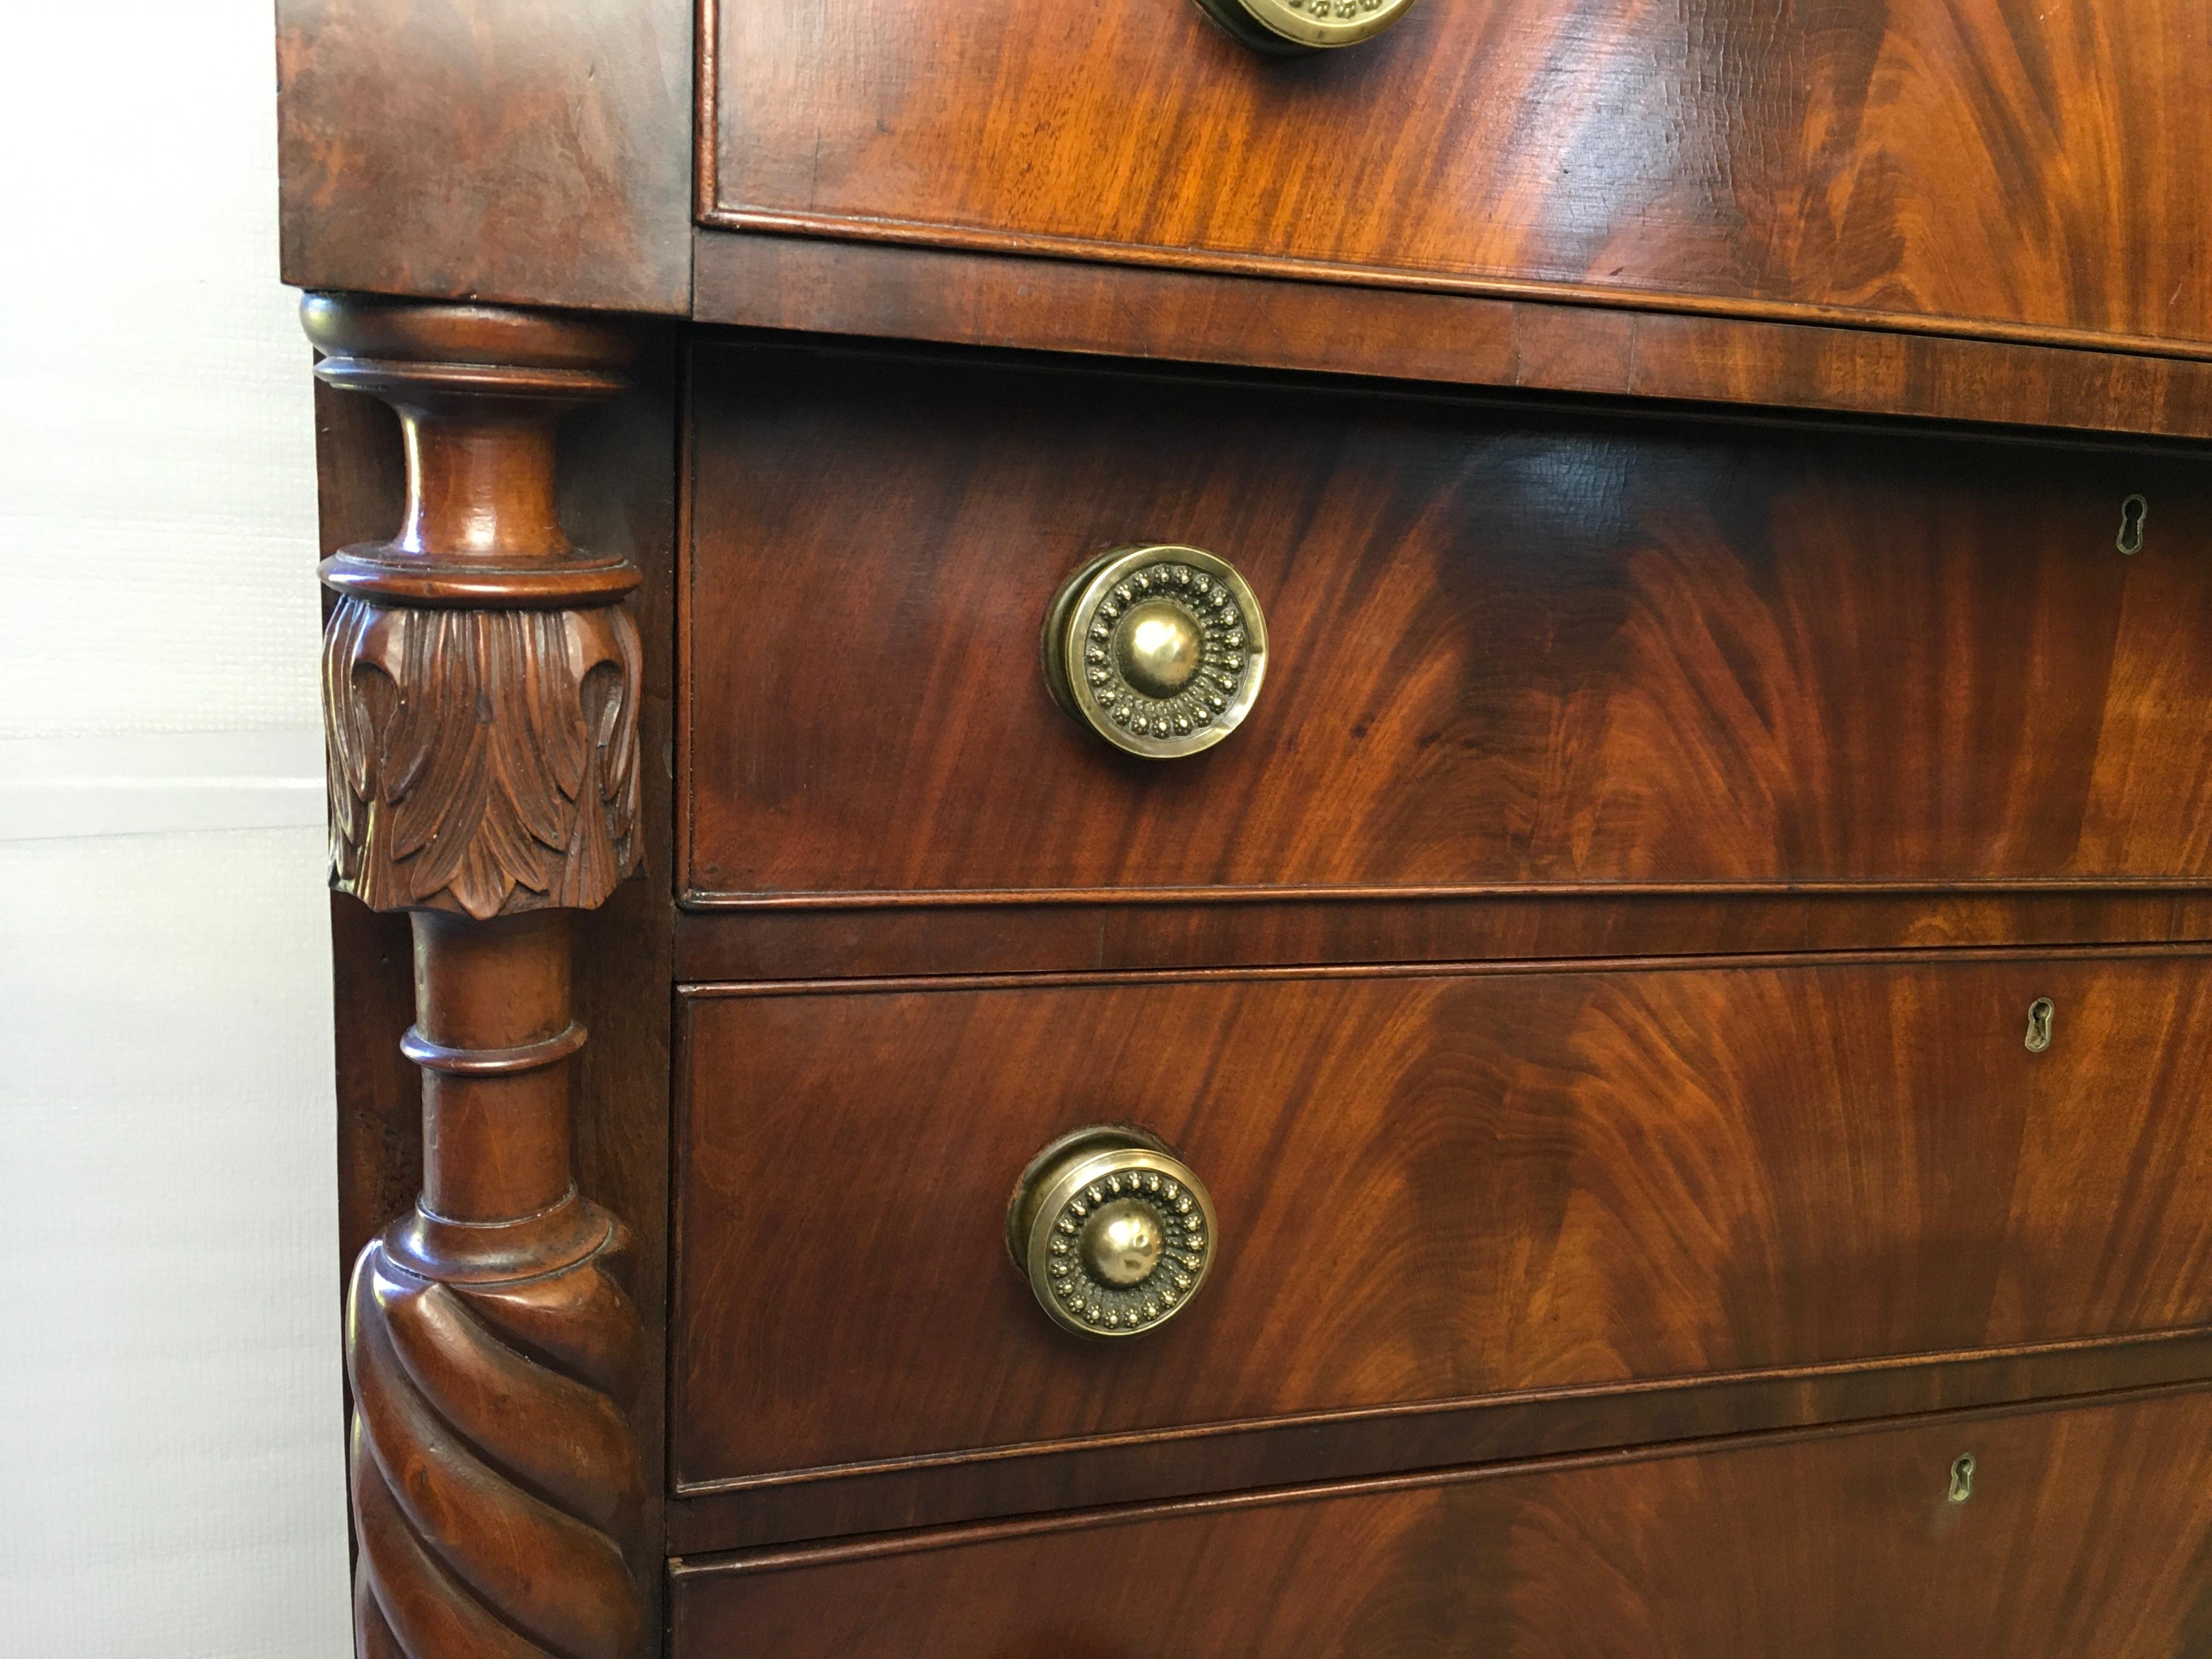 A very nice Federal Mahogany chest 1820-30. This is a really pretty chest with beautiful carved and turned columns on tall turned legs. There is a very nice book matched figured Mahogany veneer on the drawer fronts. The case wood is made of solid